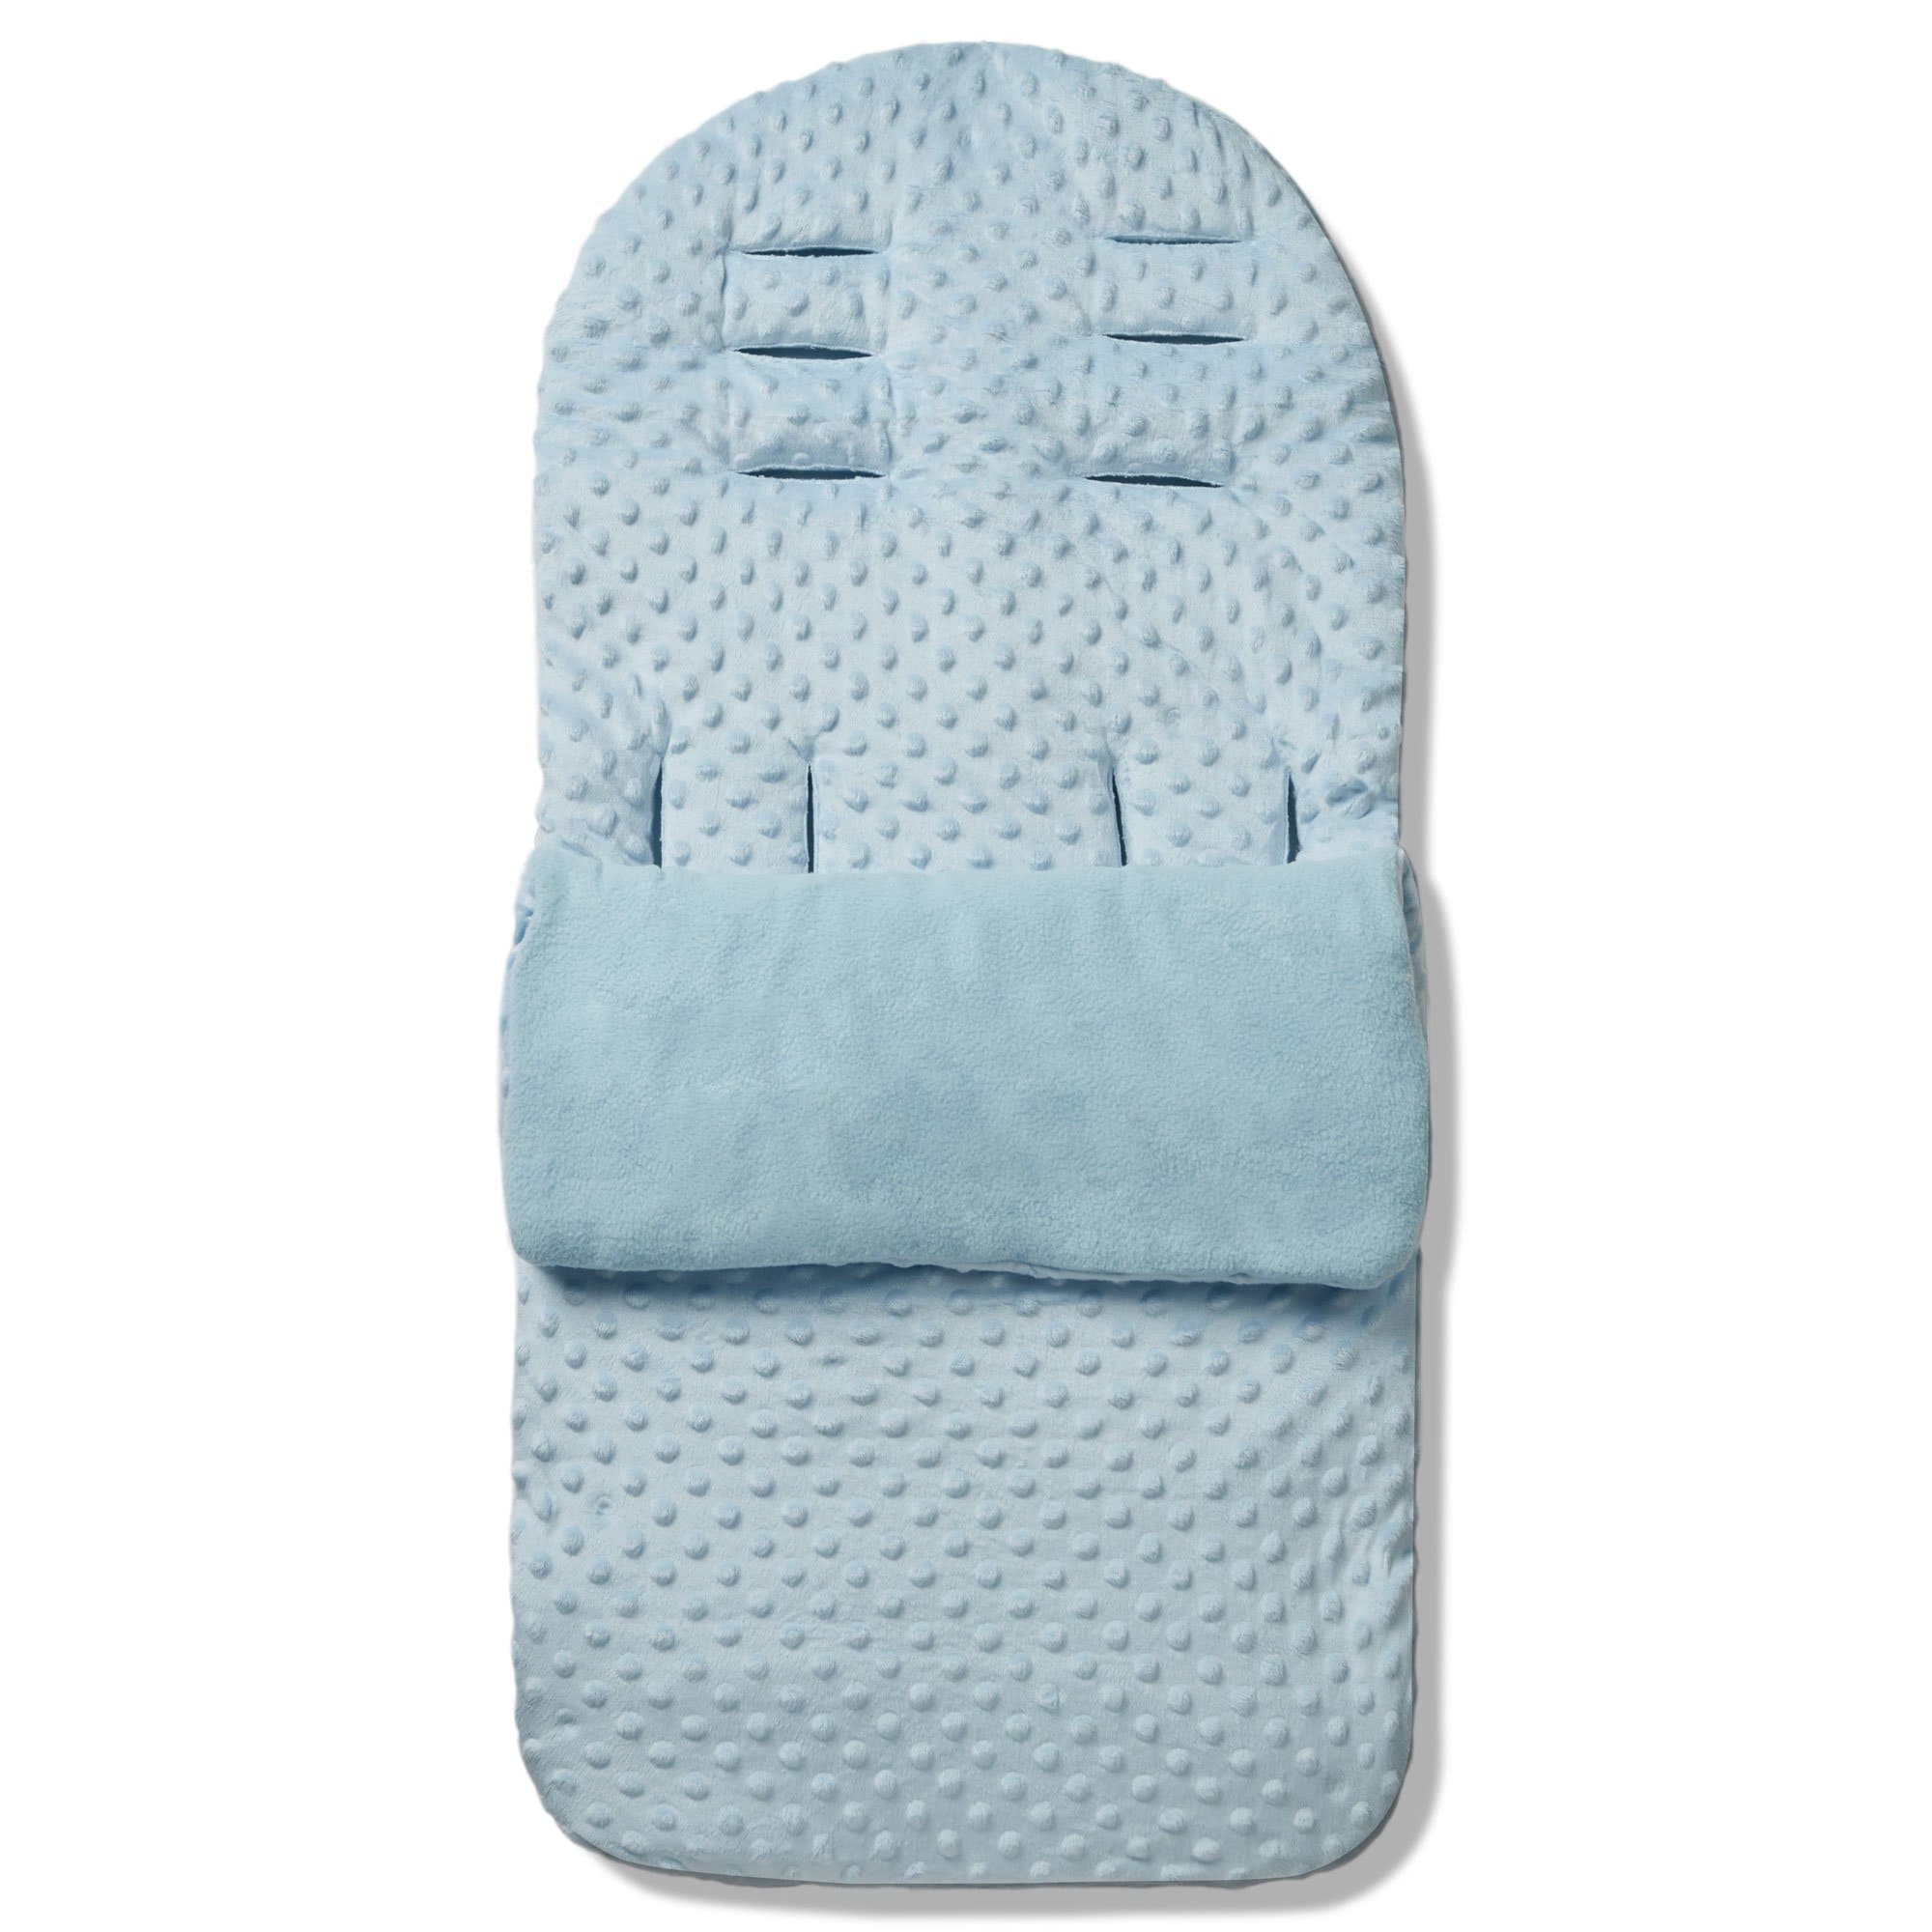 Dimple Footmuff / Cosy Toes Compatible with Quax - Blue / Fits All Models | For Your Little One